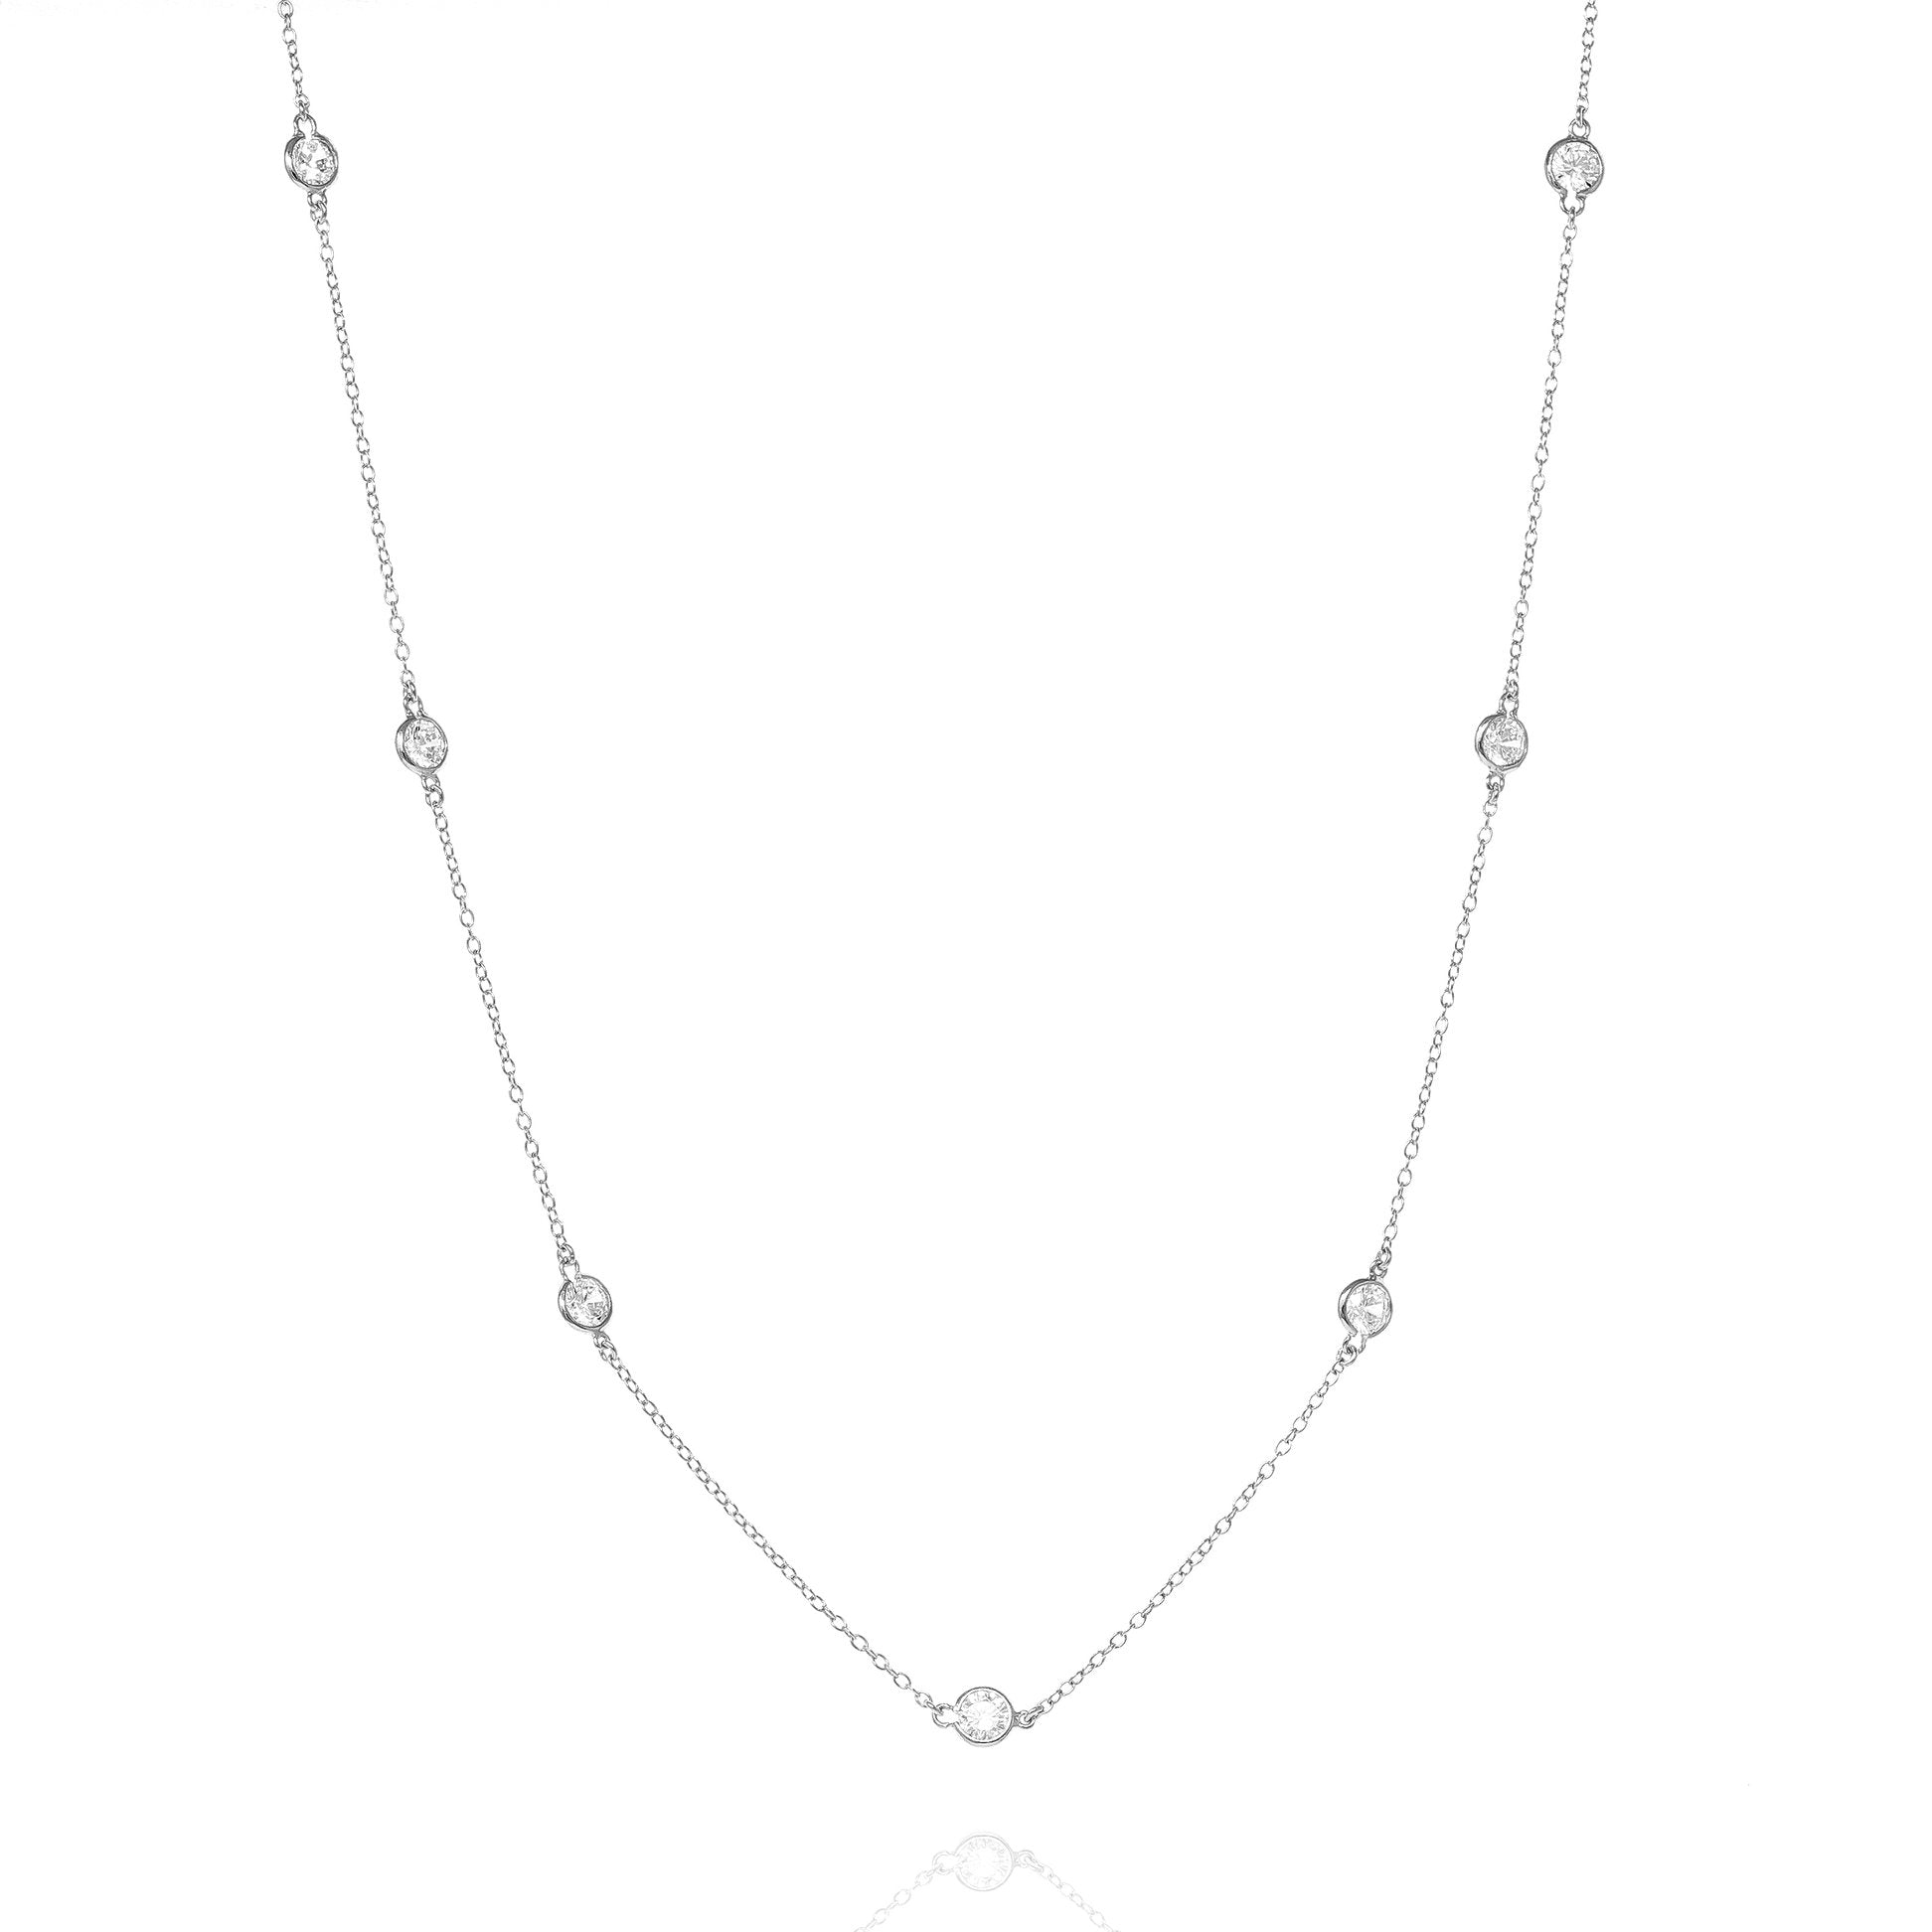 Silver Brompton Chain Necklace with Cubic Zirconia - Lulu B Jewellery